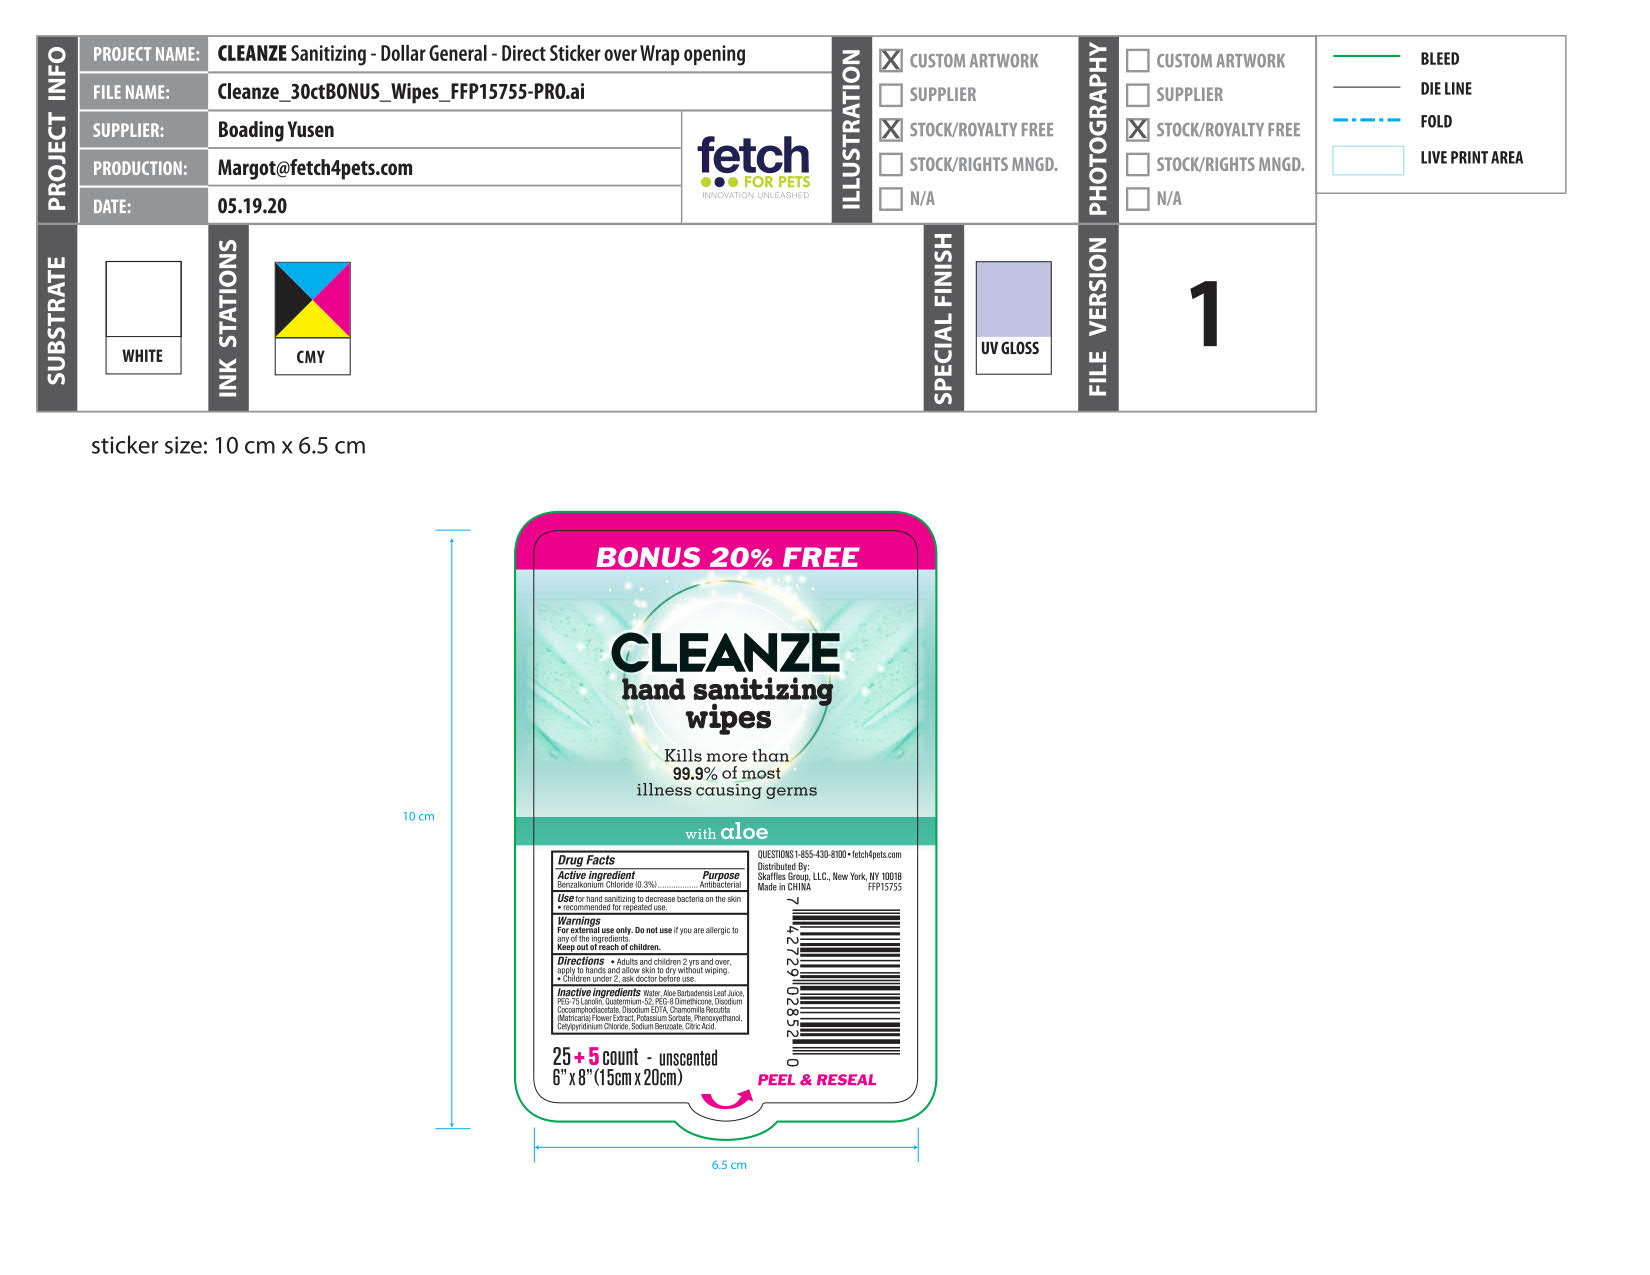 Cleanze hand sanitizing wipes